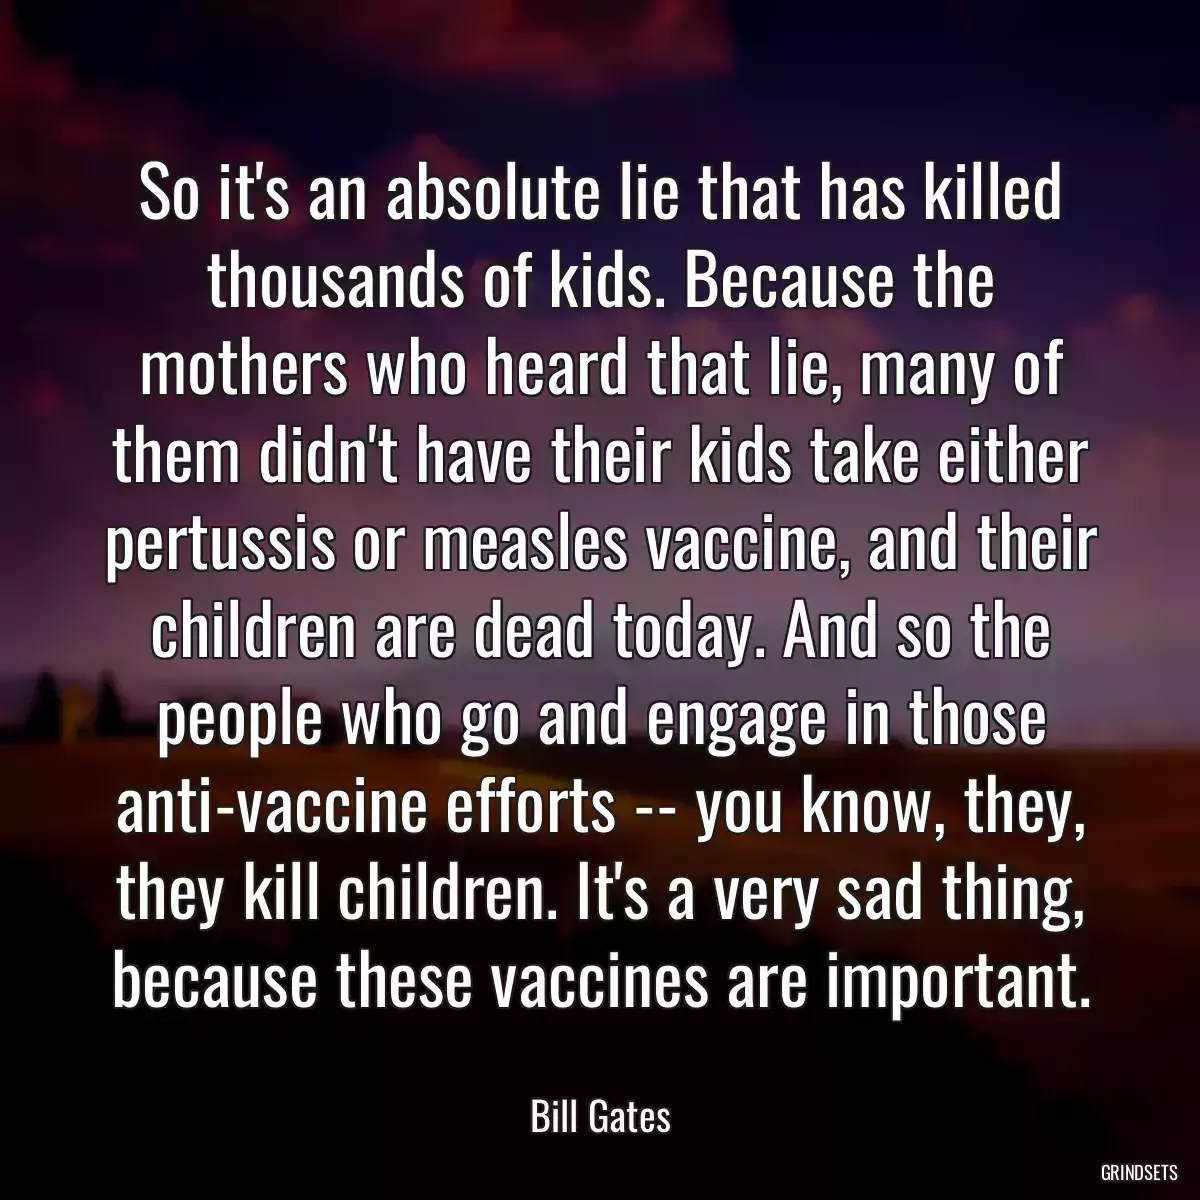 So it\'s an absolute lie that has killed thousands of kids. Because the mothers who heard that lie, many of them didn\'t have their kids take either pertussis or measles vaccine, and their children are dead today. And so the people who go and engage in those anti-vaccine efforts -- you know, they, they kill children. It\'s a very sad thing, because these vaccines are important.